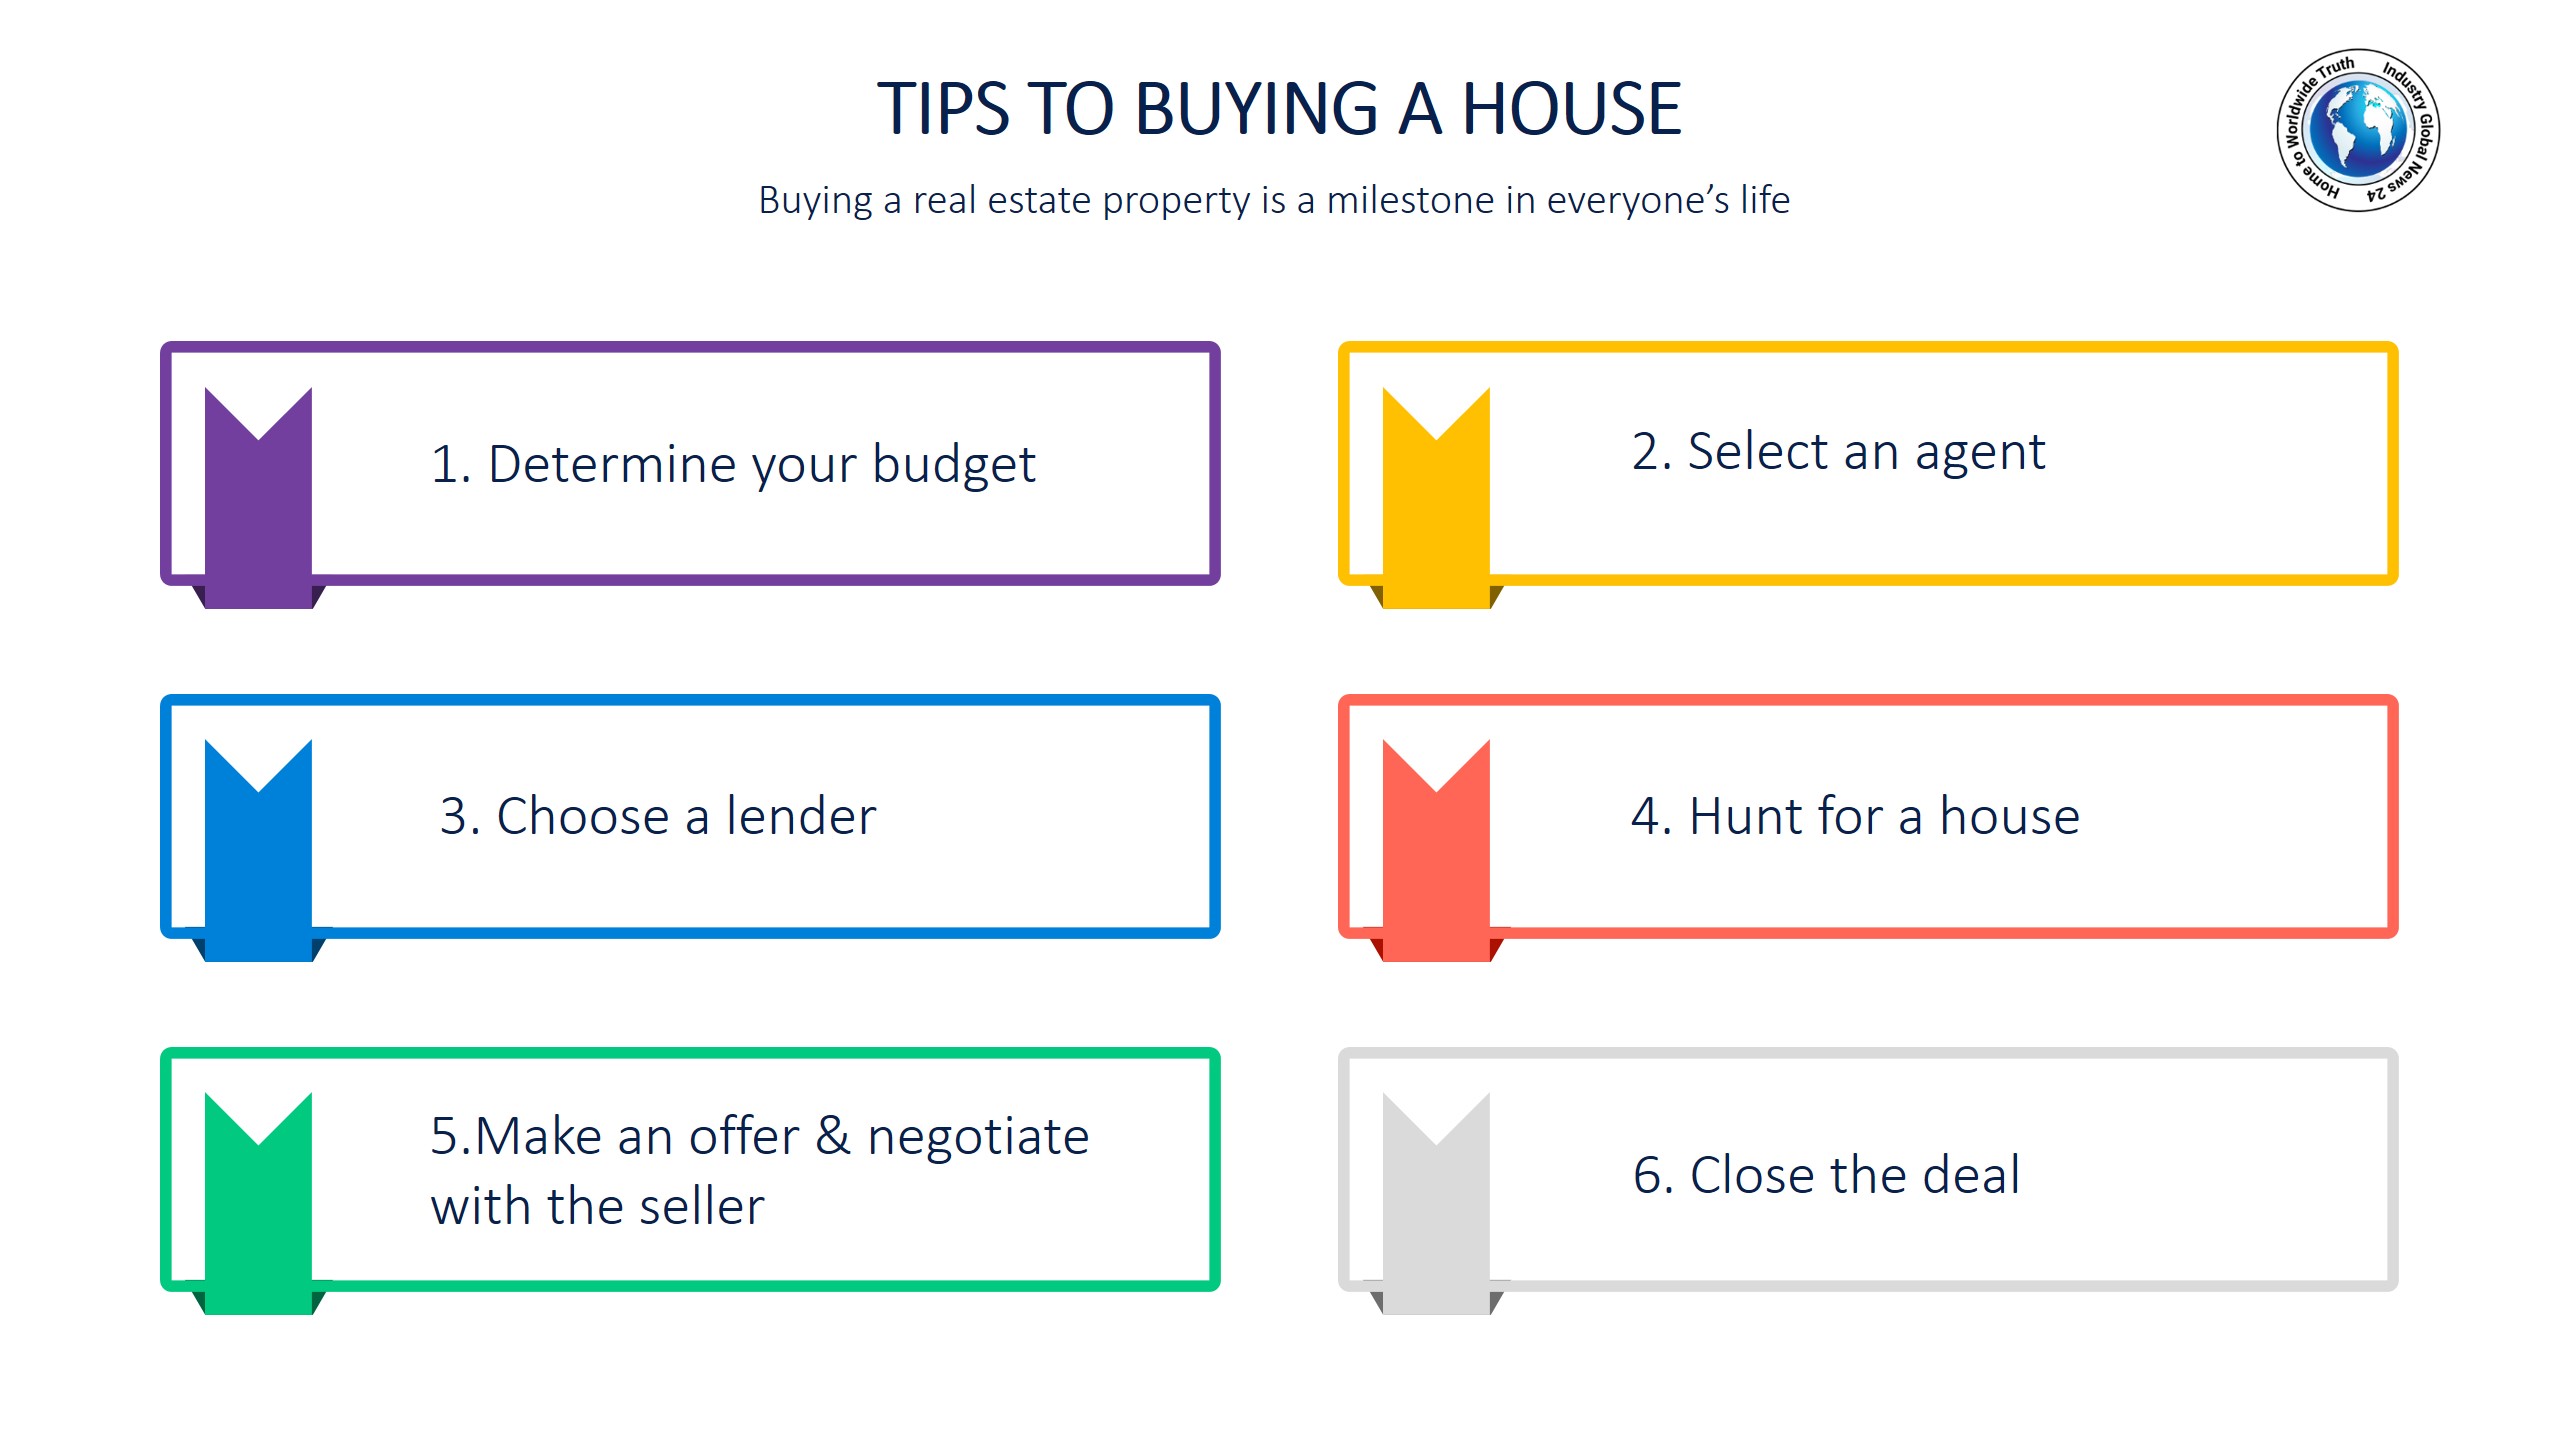 Tips to buying a house